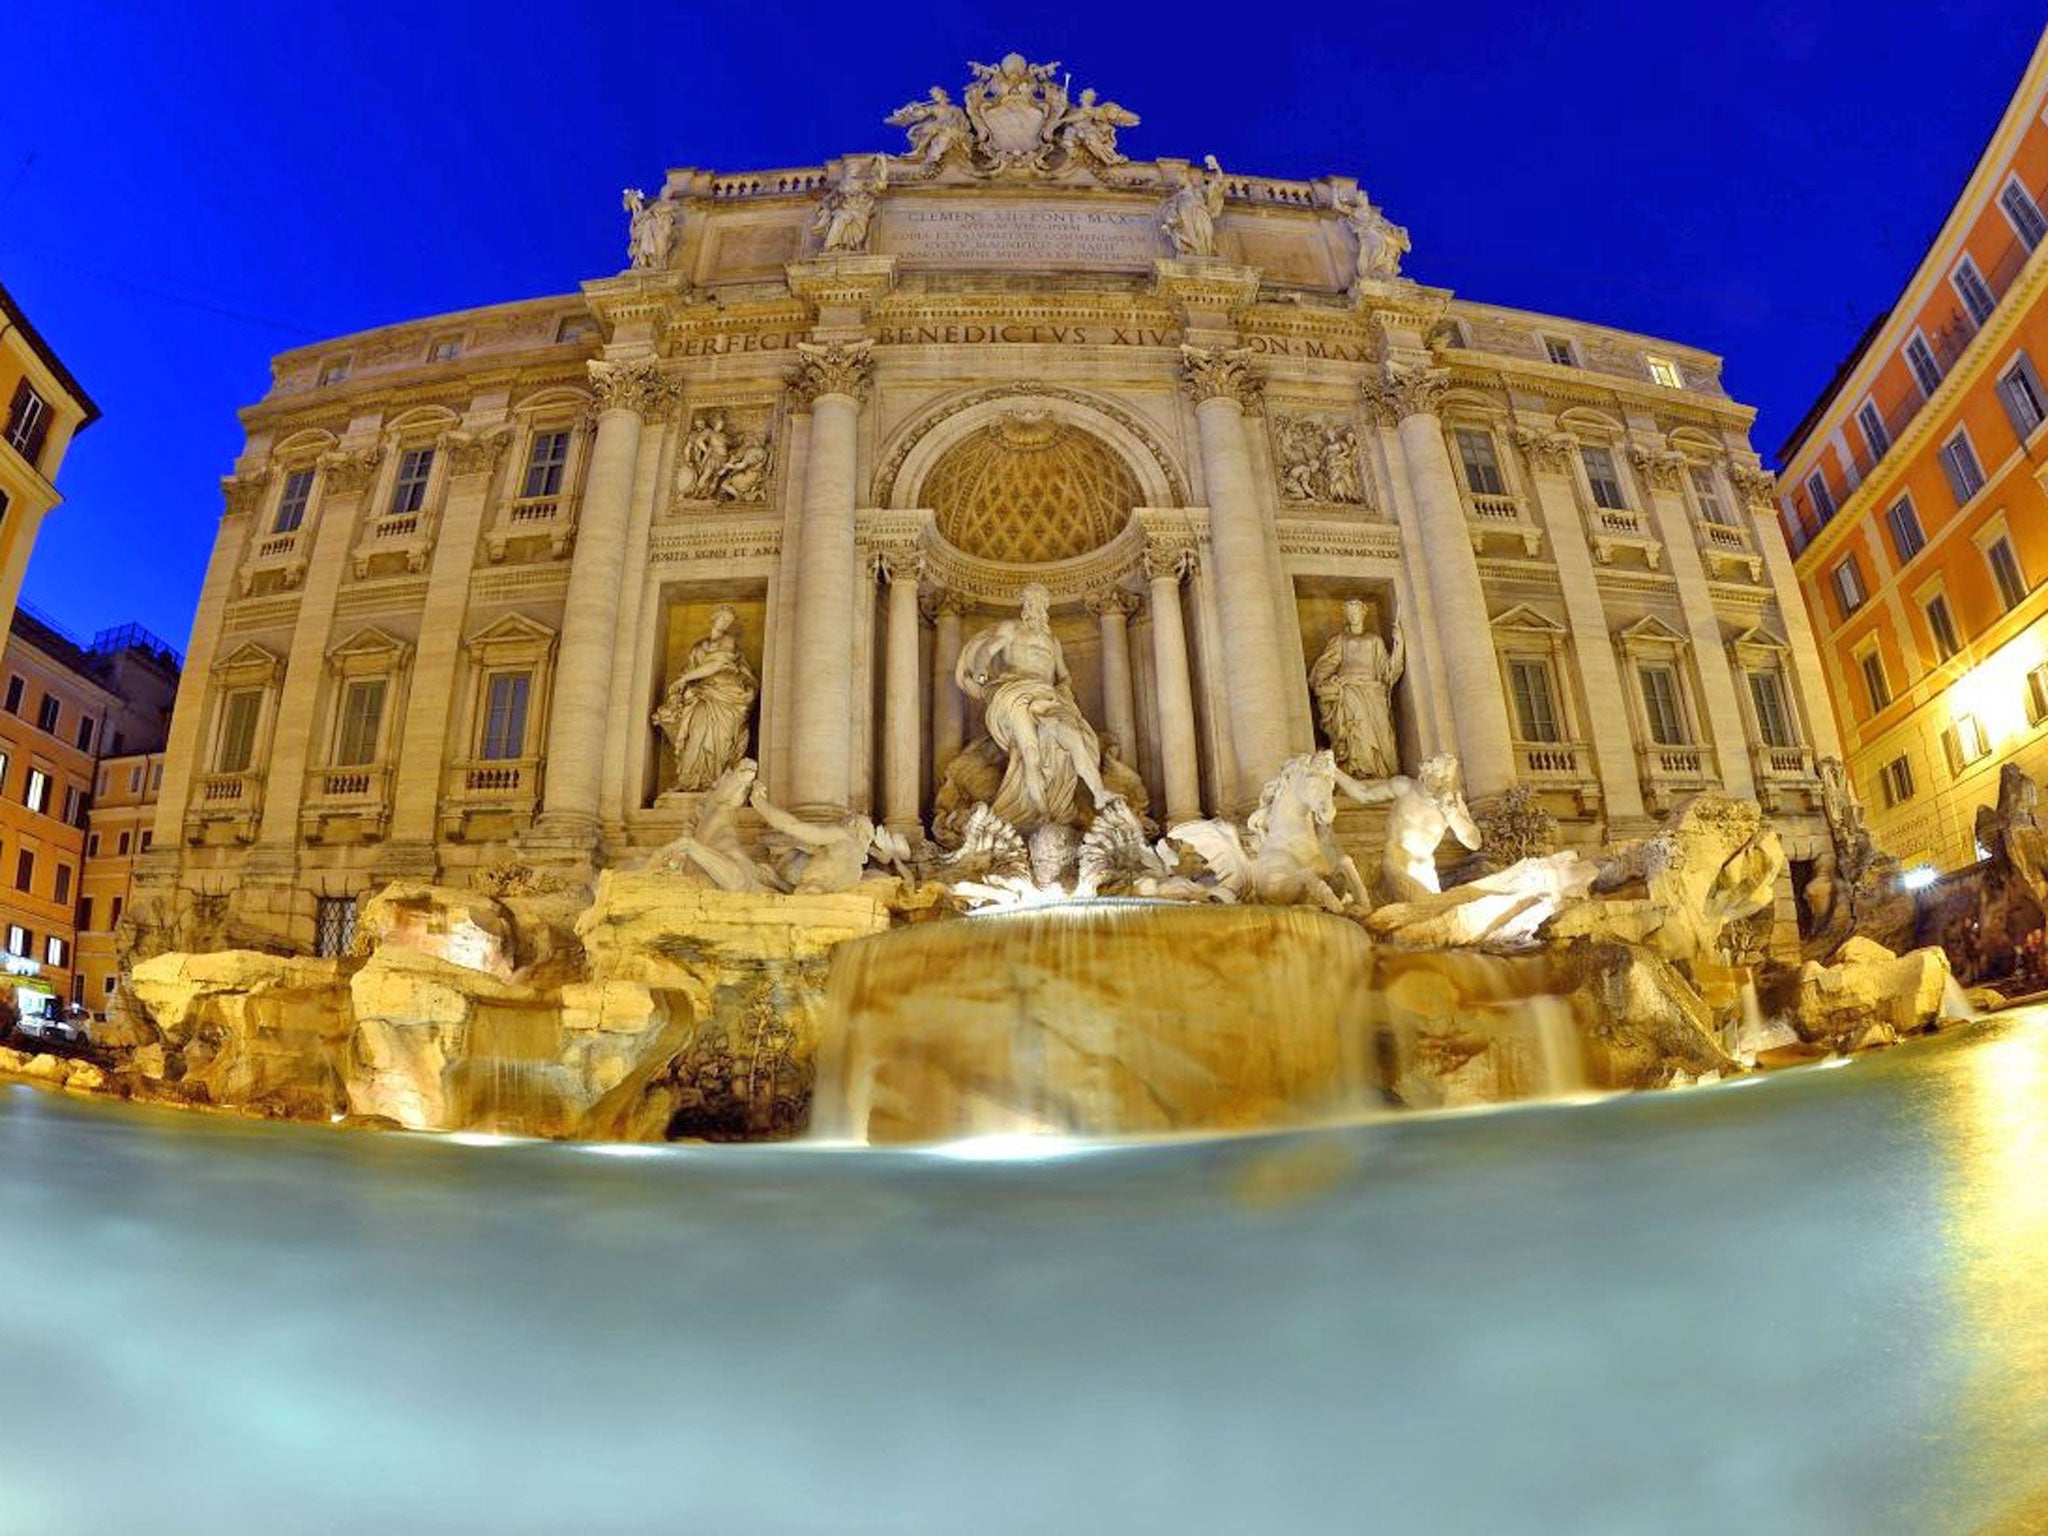 Italian fashion house Fendi announced it would finance a renovation of the Trevi Fountain in Rome, becoming the latest luxury group to fund repairs on a priceless heritage